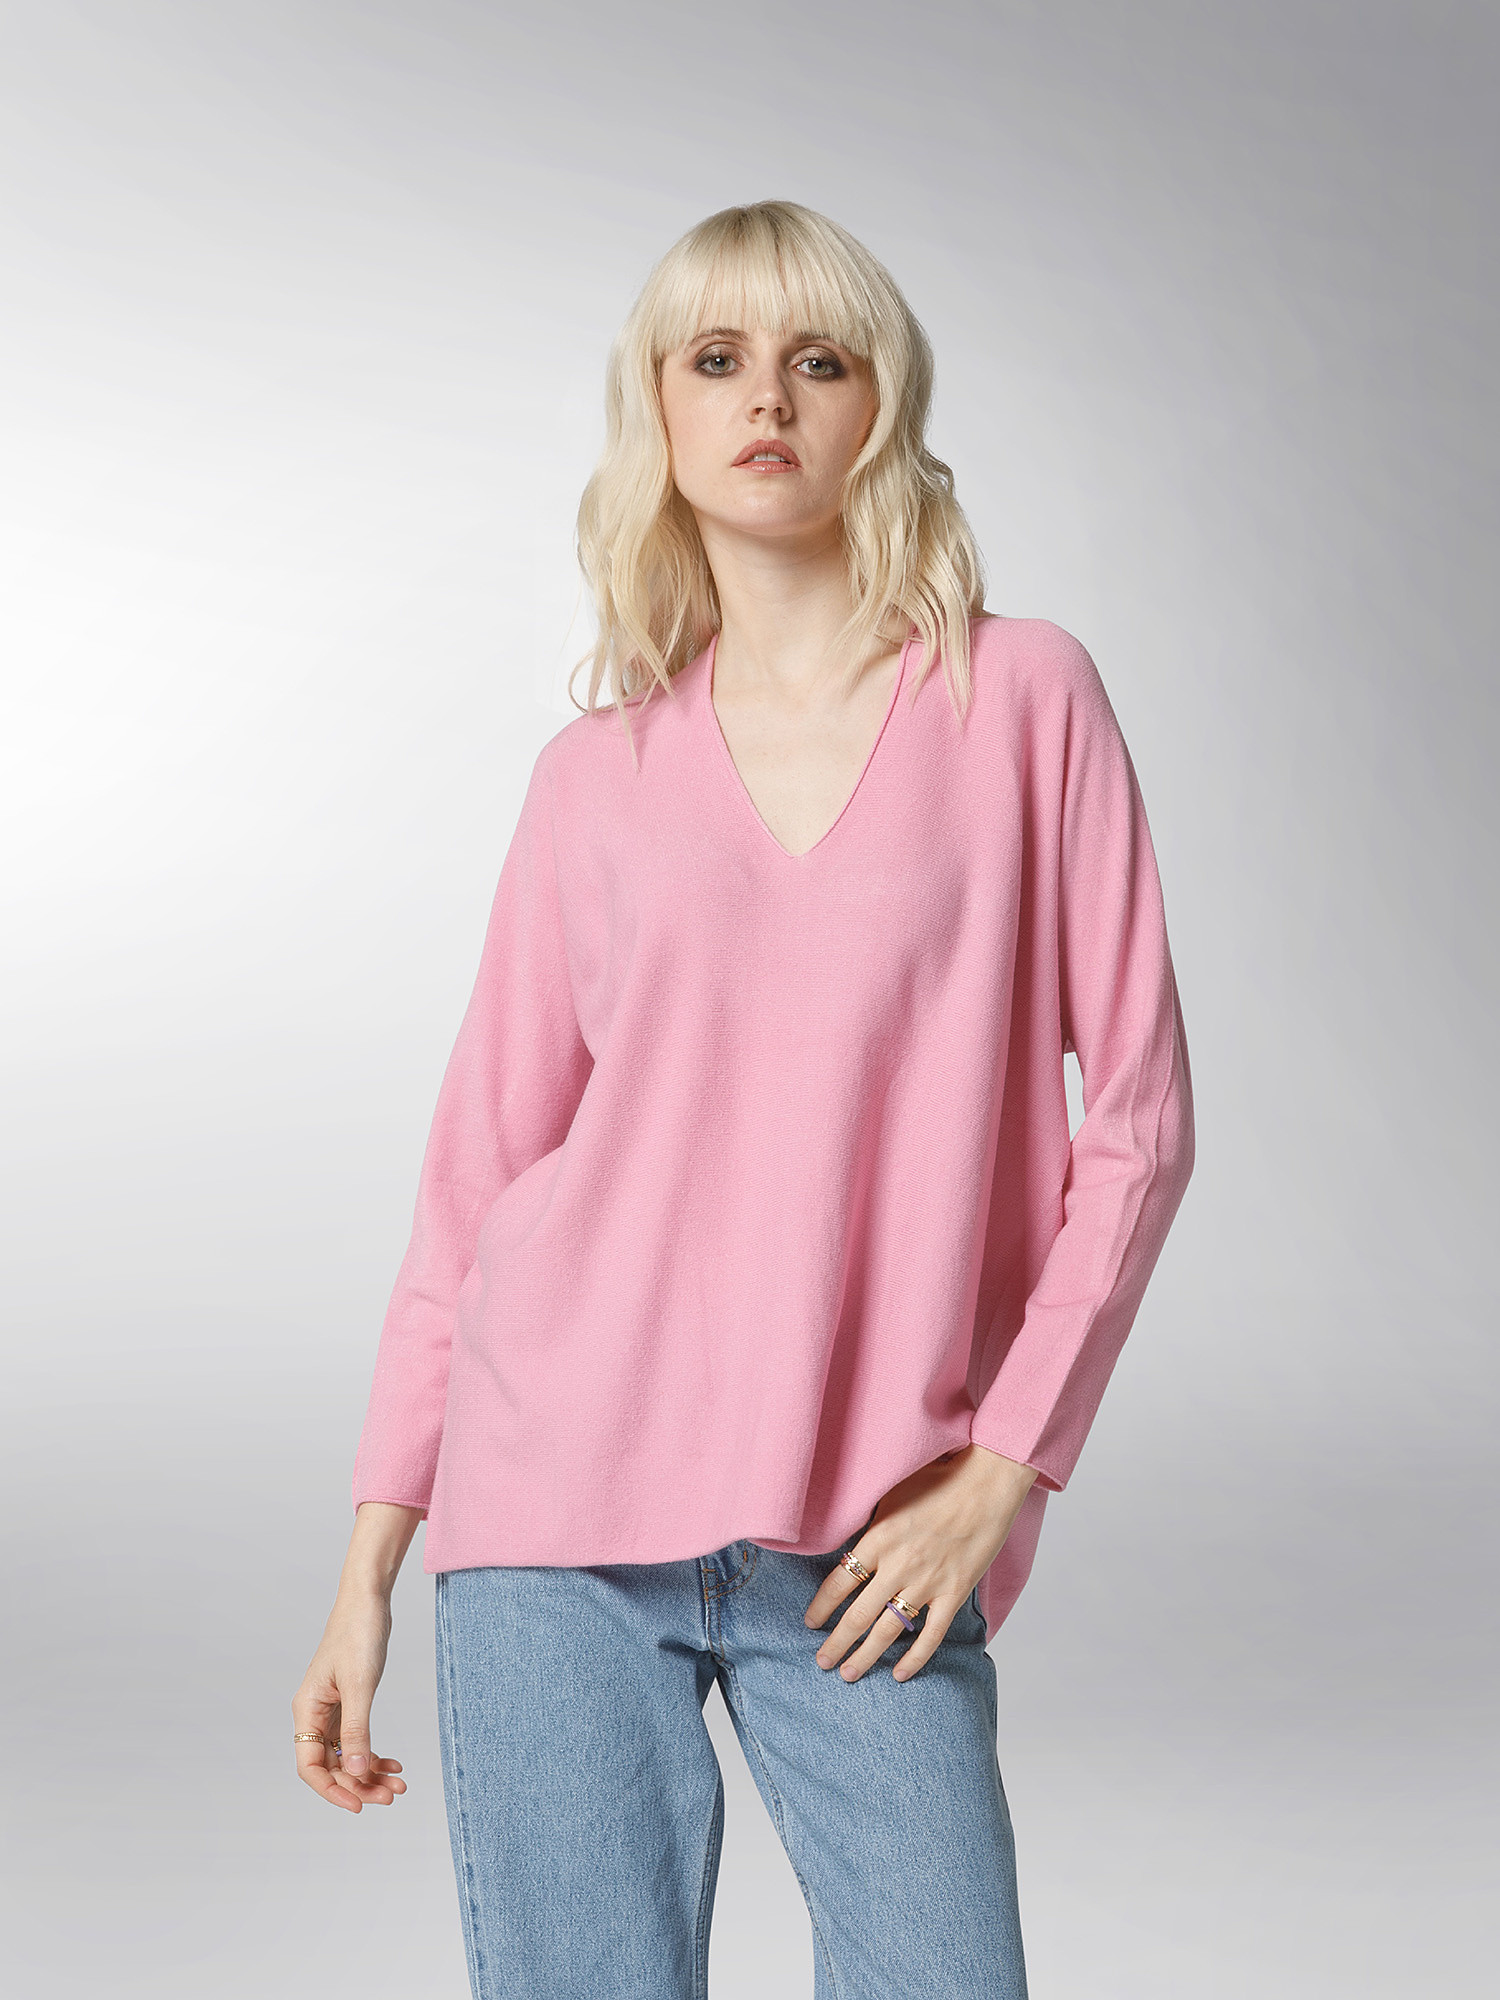 K Collection - Pullover, Pink Fuchsia, large image number 3